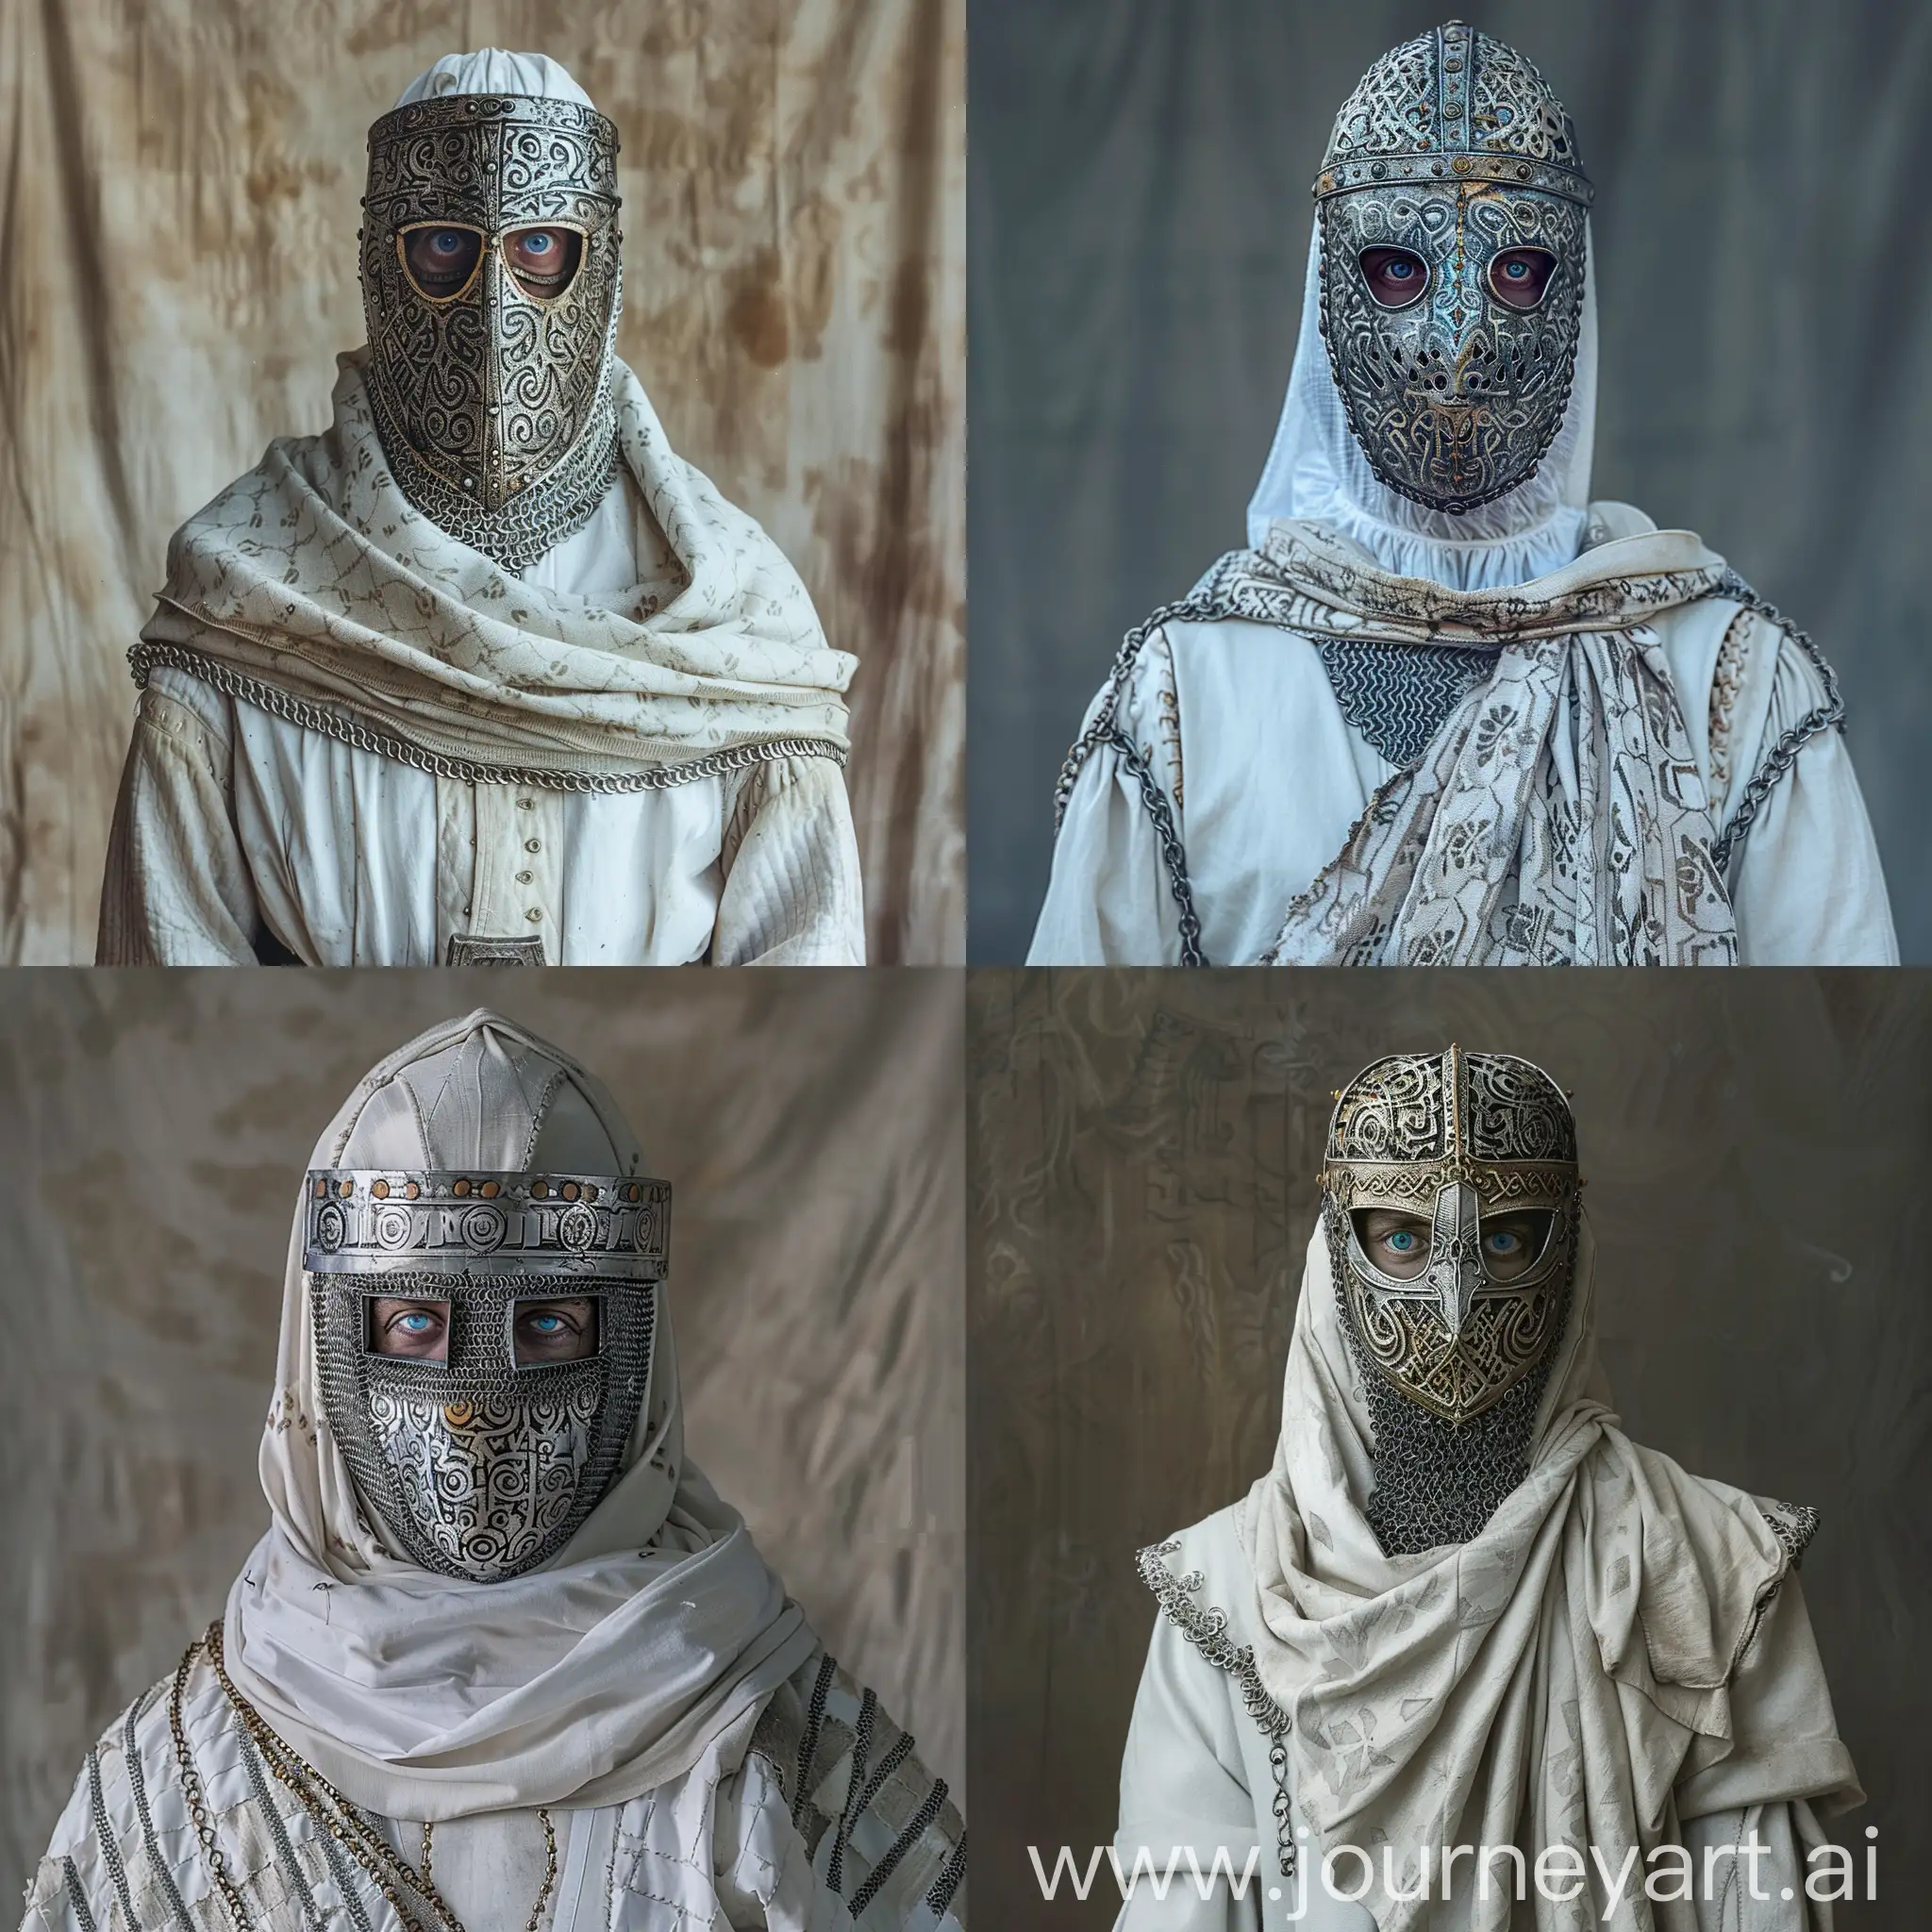 King Baldwin 4, wearing a white uniform covering his entire body, with chain mail on top. On his head is a shawl of cloth as long as his shoulders, on his face is an iron mask with patterns, through which only his blue eyes are visible